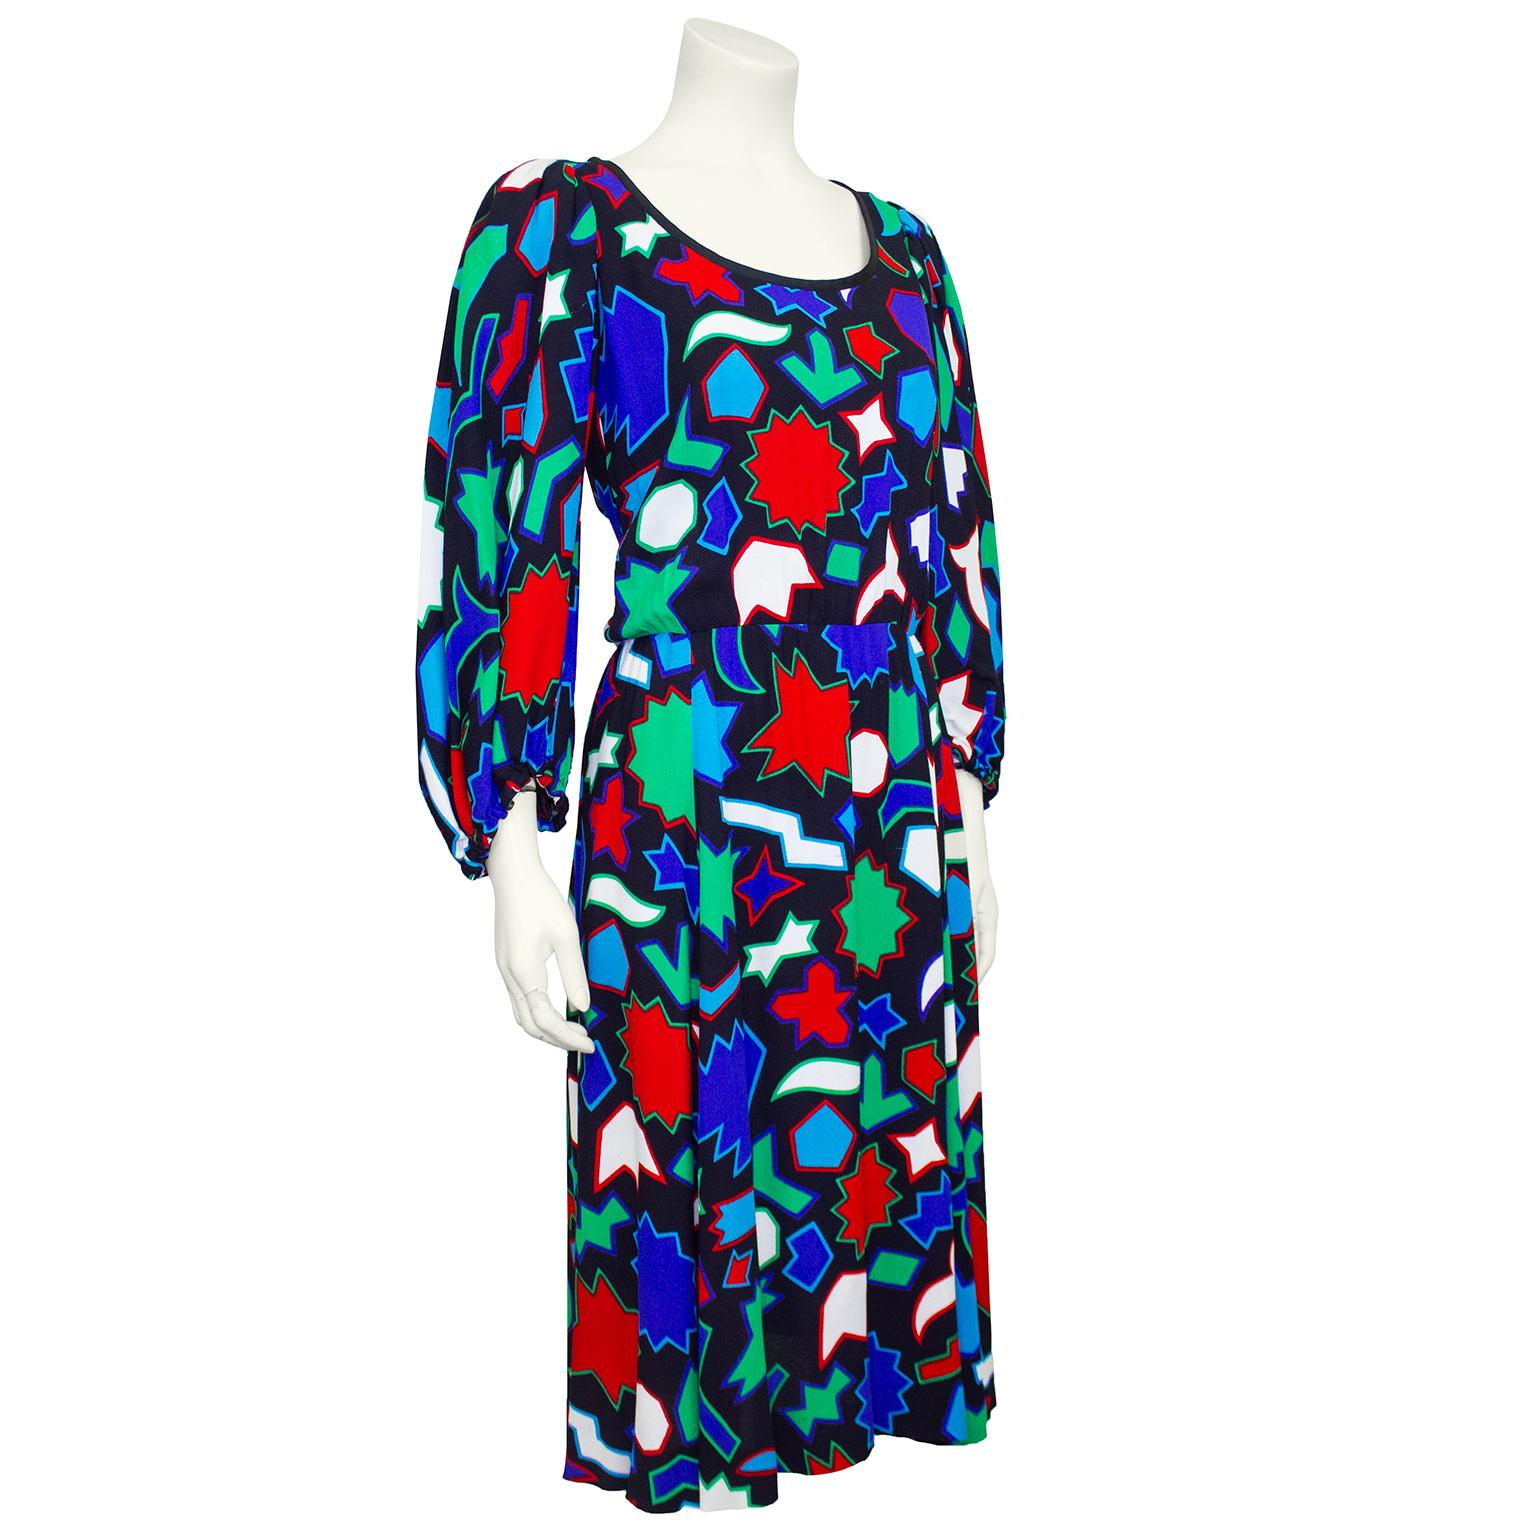 1980s Yves Saint Laurent Rive Gauche rayon crepe de chine dress. Allover blue, red, green and white geometric print. Scoop neckline with black trim and bishop sleeves with elastic cuffs. Fits slightly loose in the body with a waistband and flowing